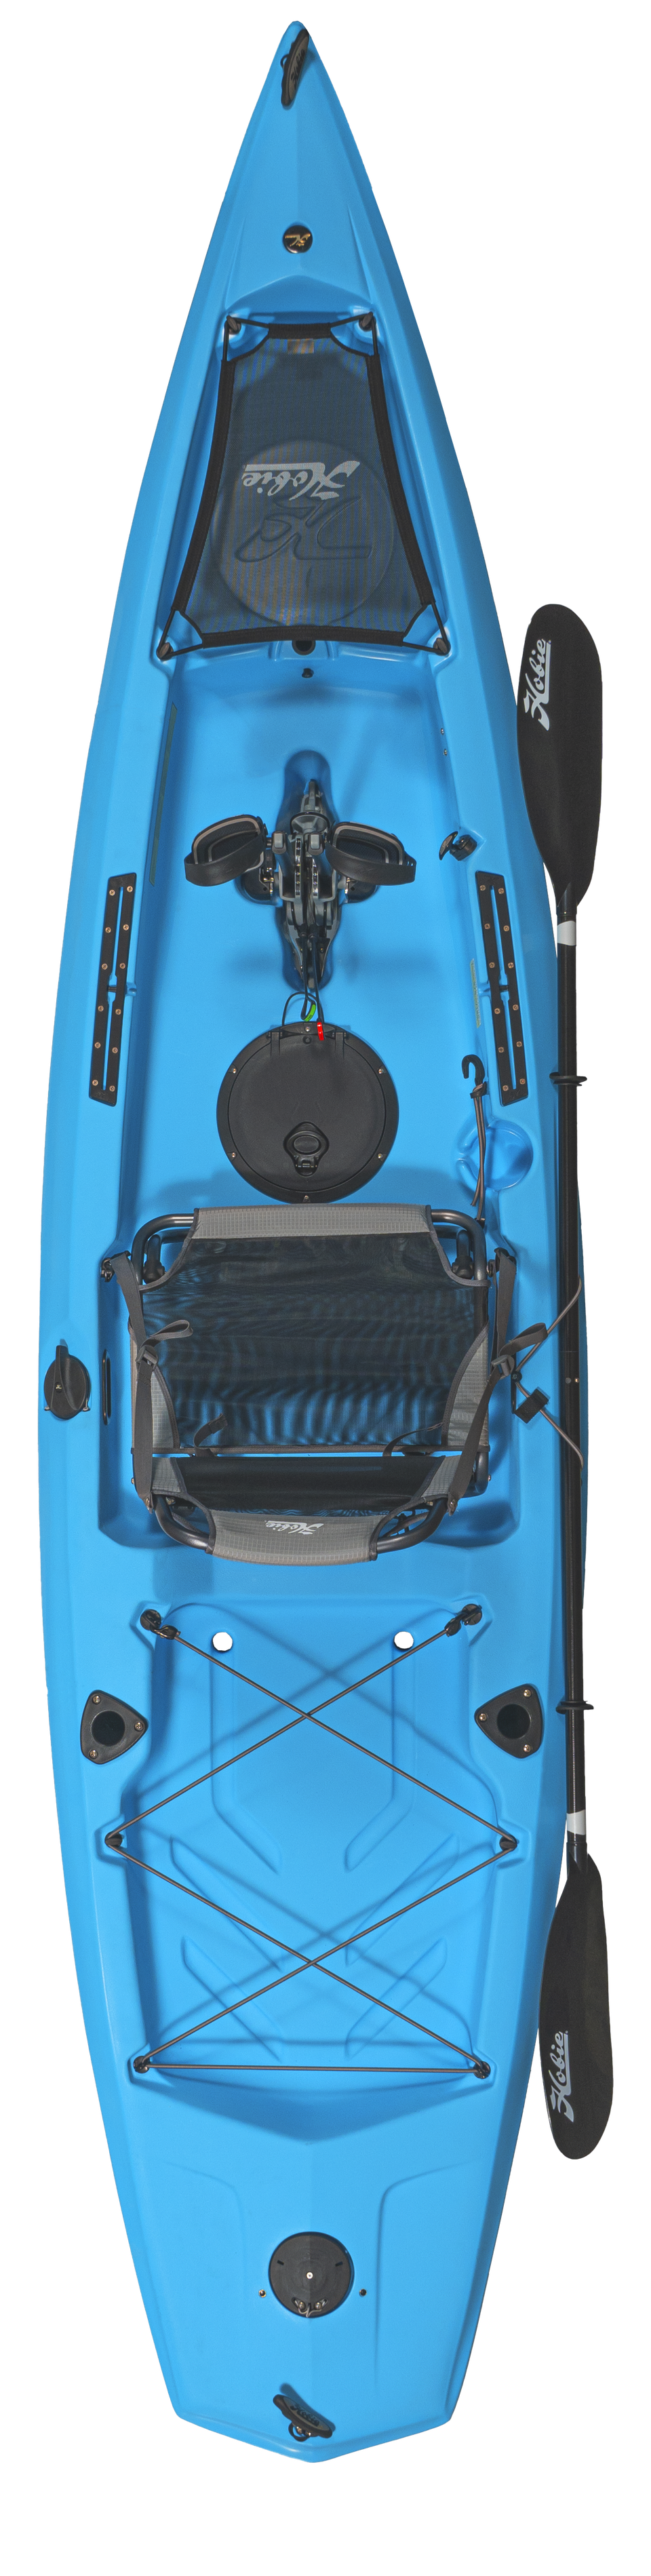 A blue Mirage Compass 12 kayak with a paddle and MD180 Kickup Pedal Drive by Hobie.